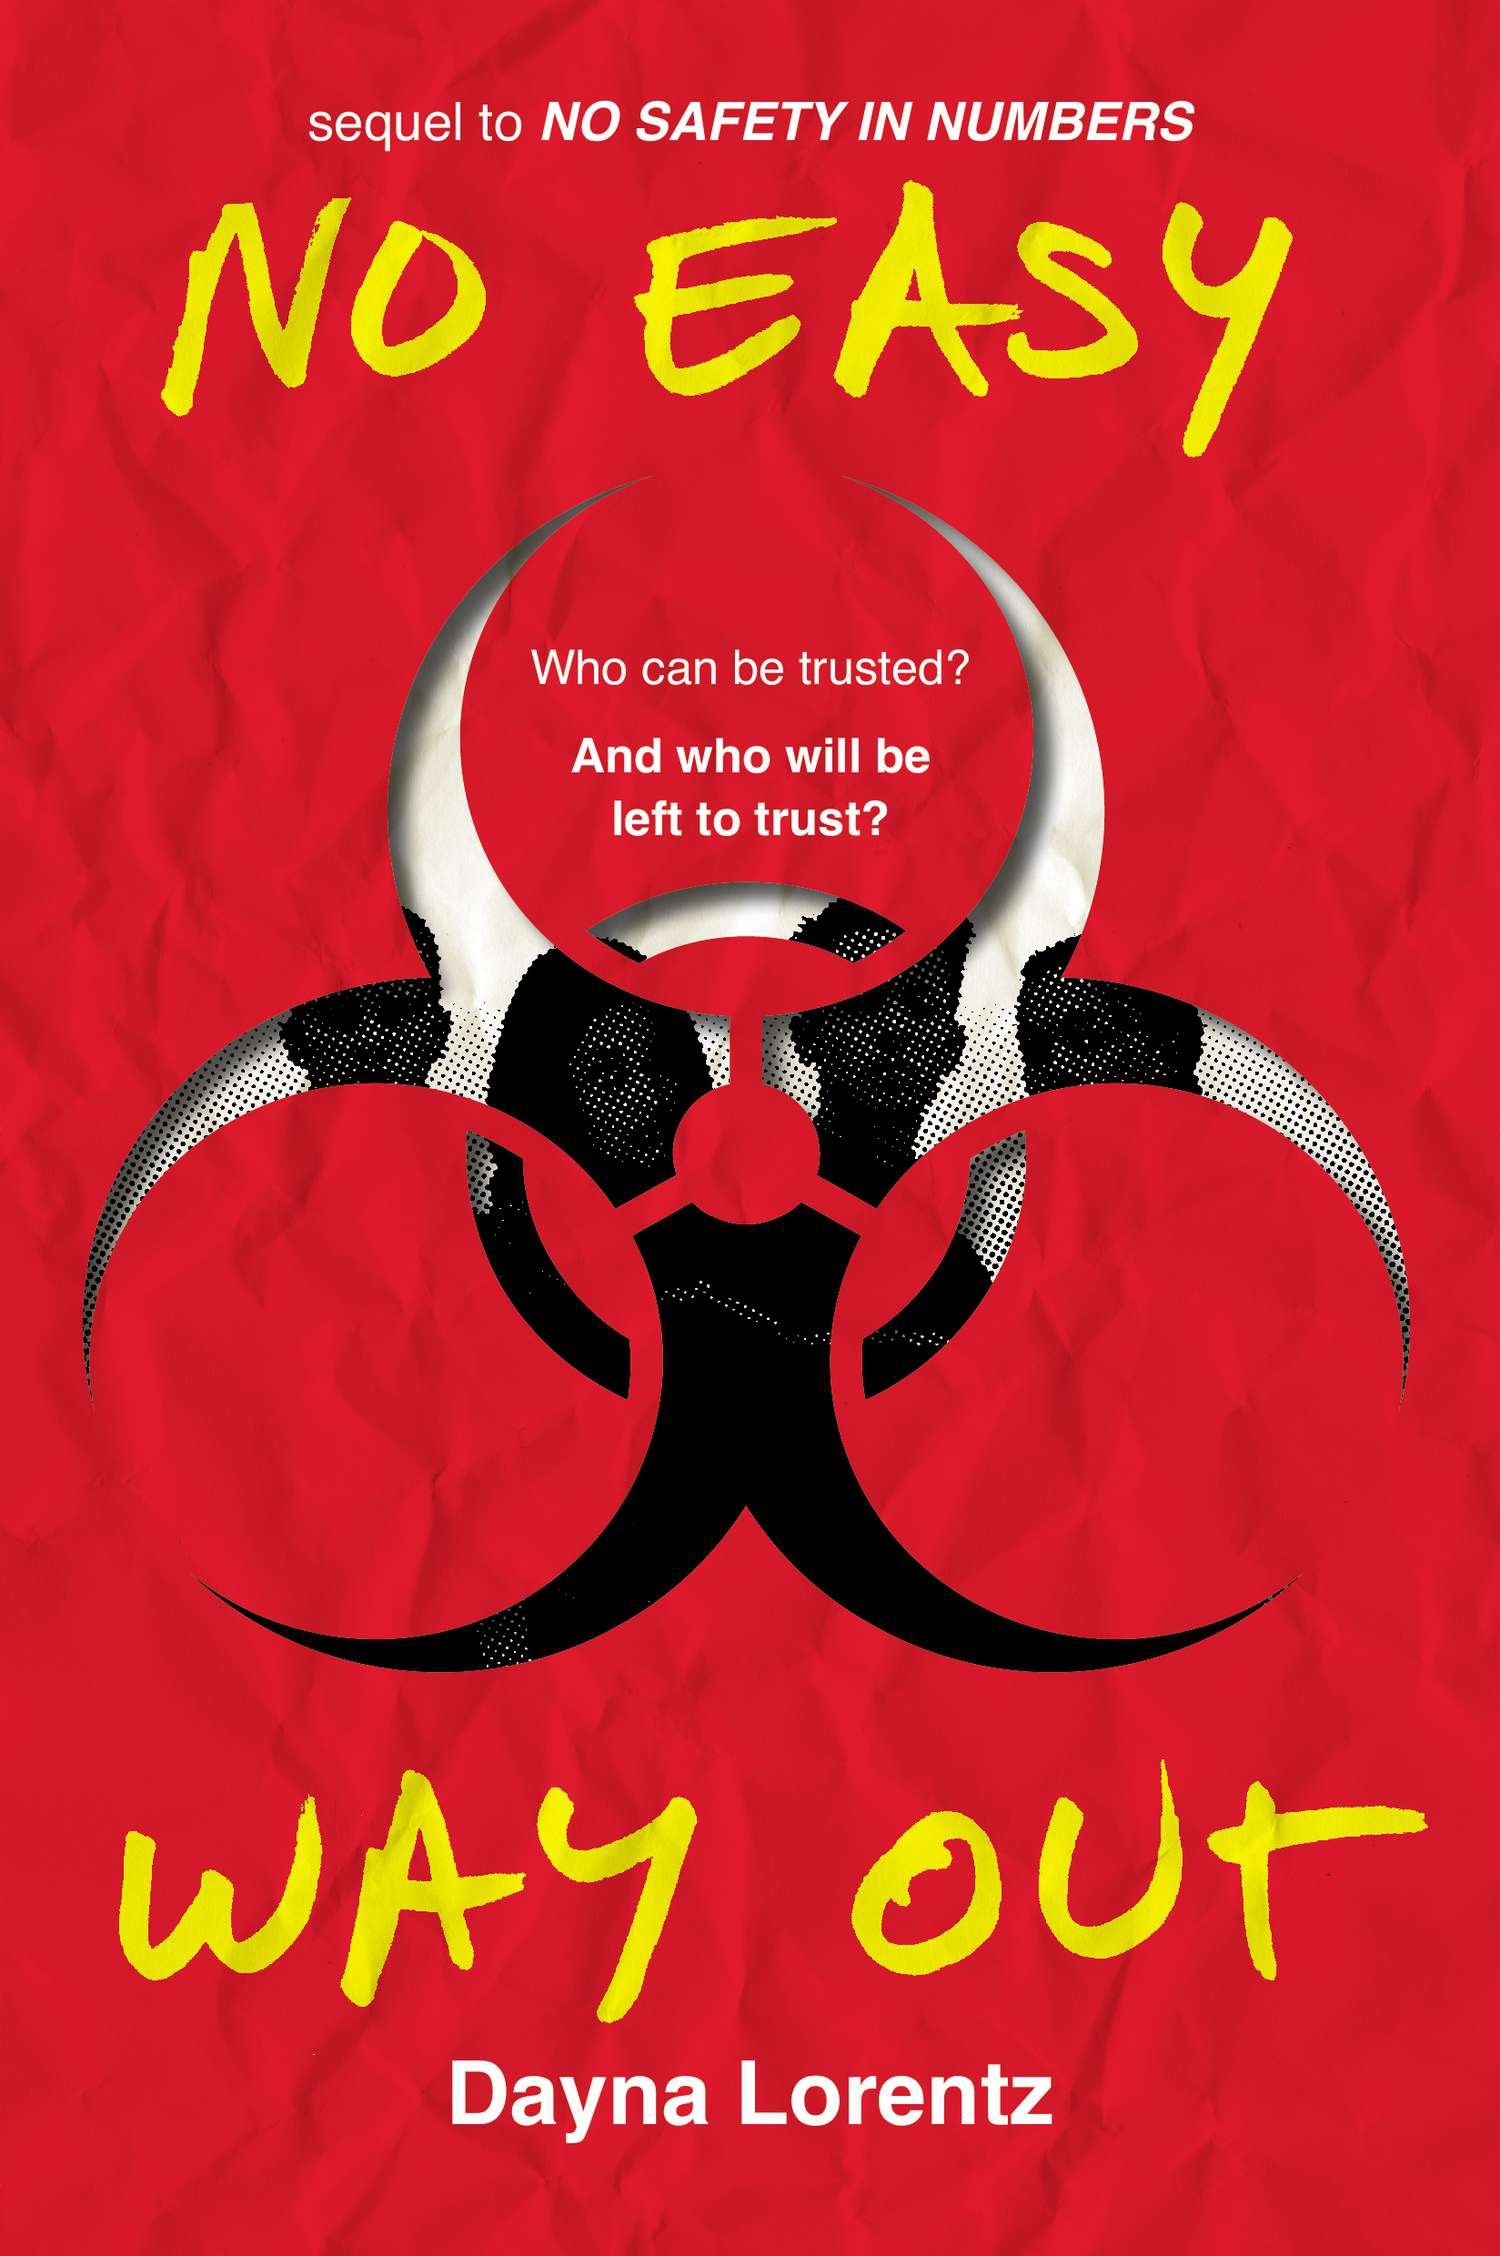 No Easy Way Out No Safety In Numbers Book 2 By Dayna Lorentz Penguin Books Australia